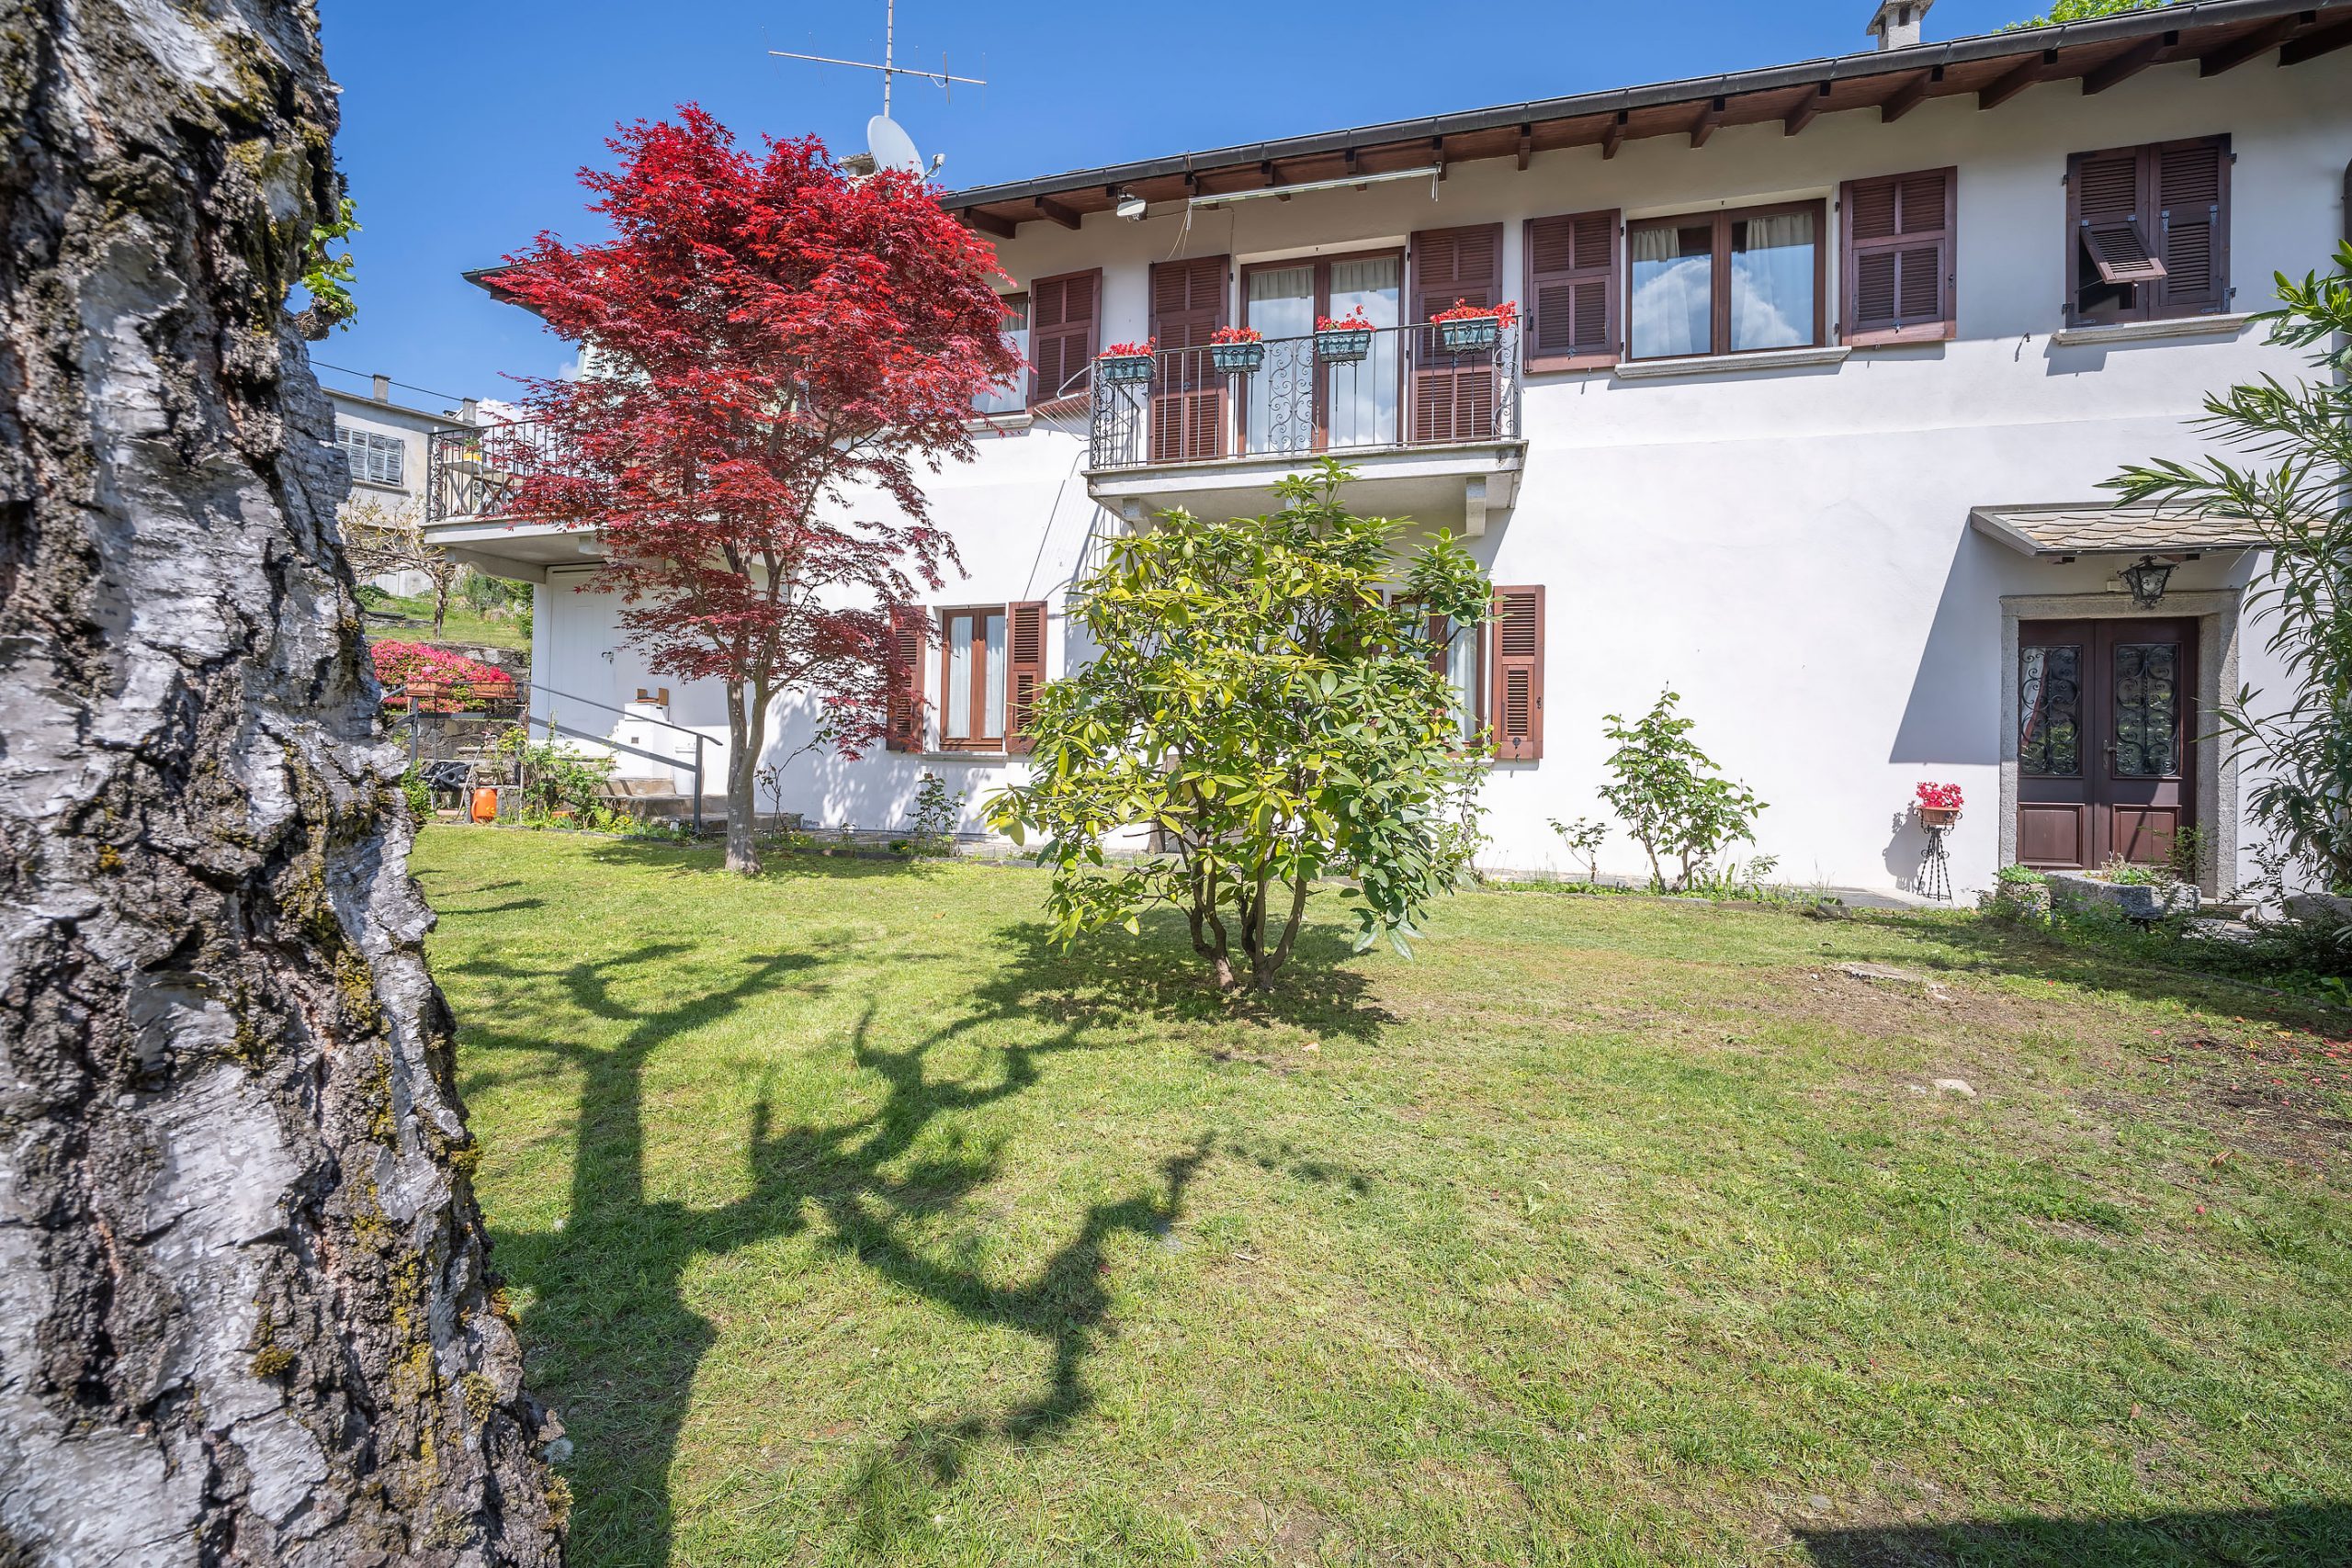 ORTA Detached house with garden and car access